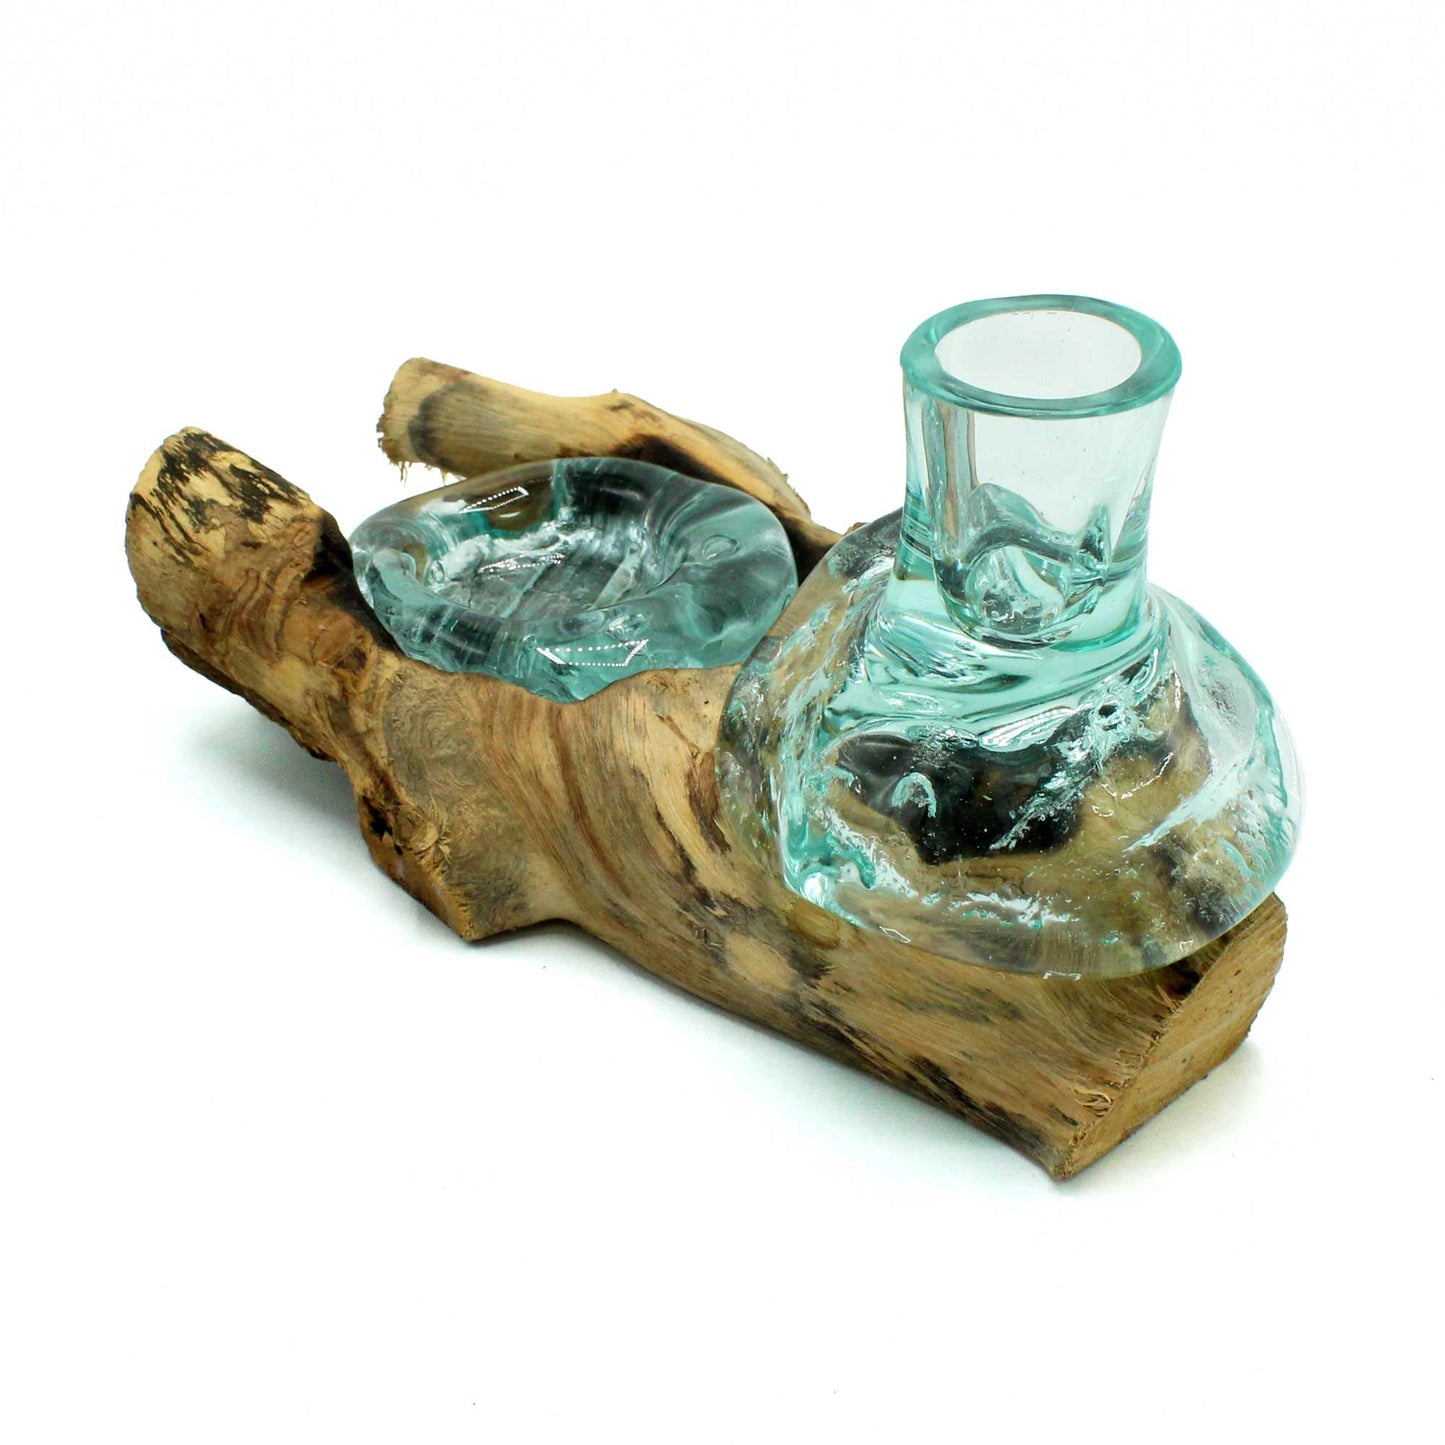 Molten Glass Small Flower Vase and Tealight Holder on Wood